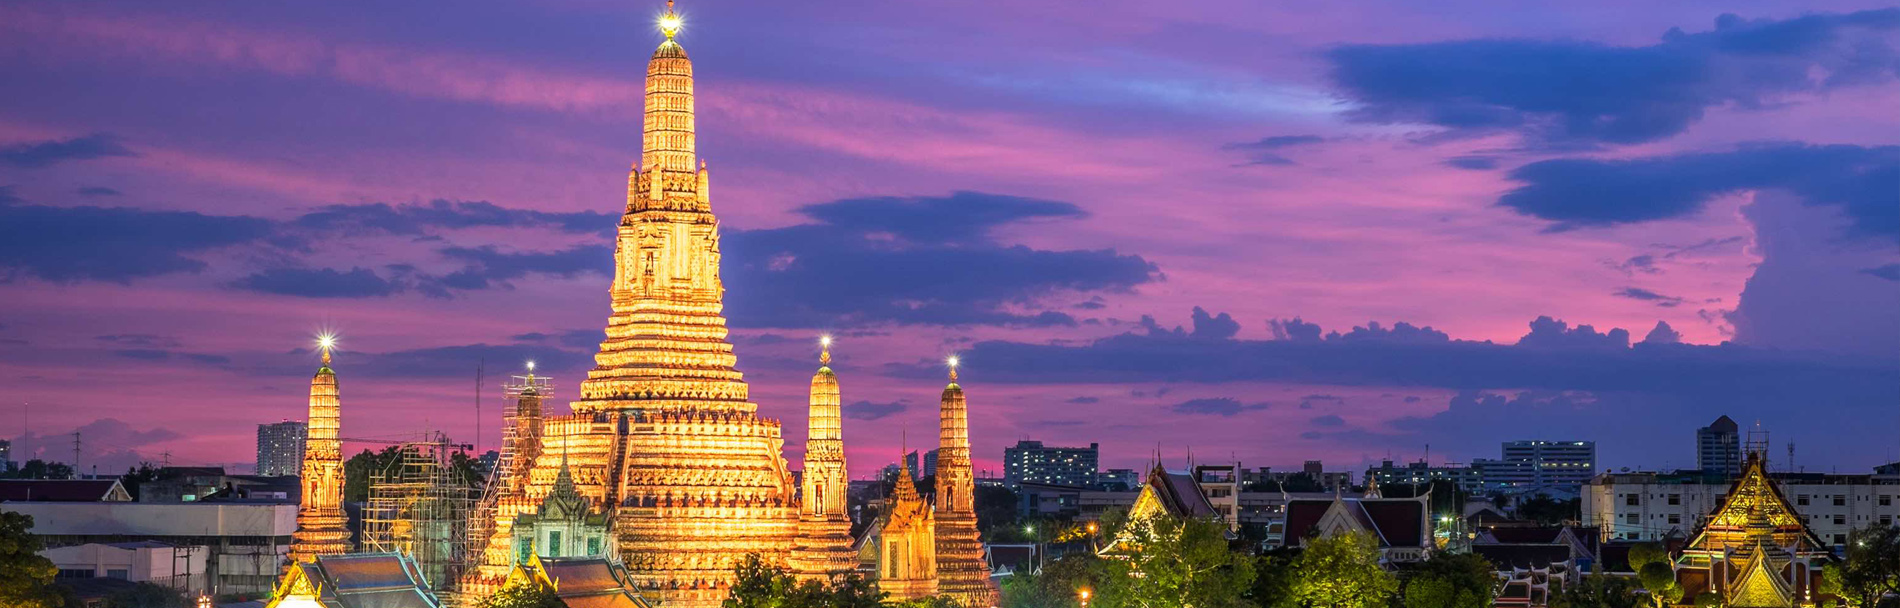 Thailand Tour Package - 4 Nights